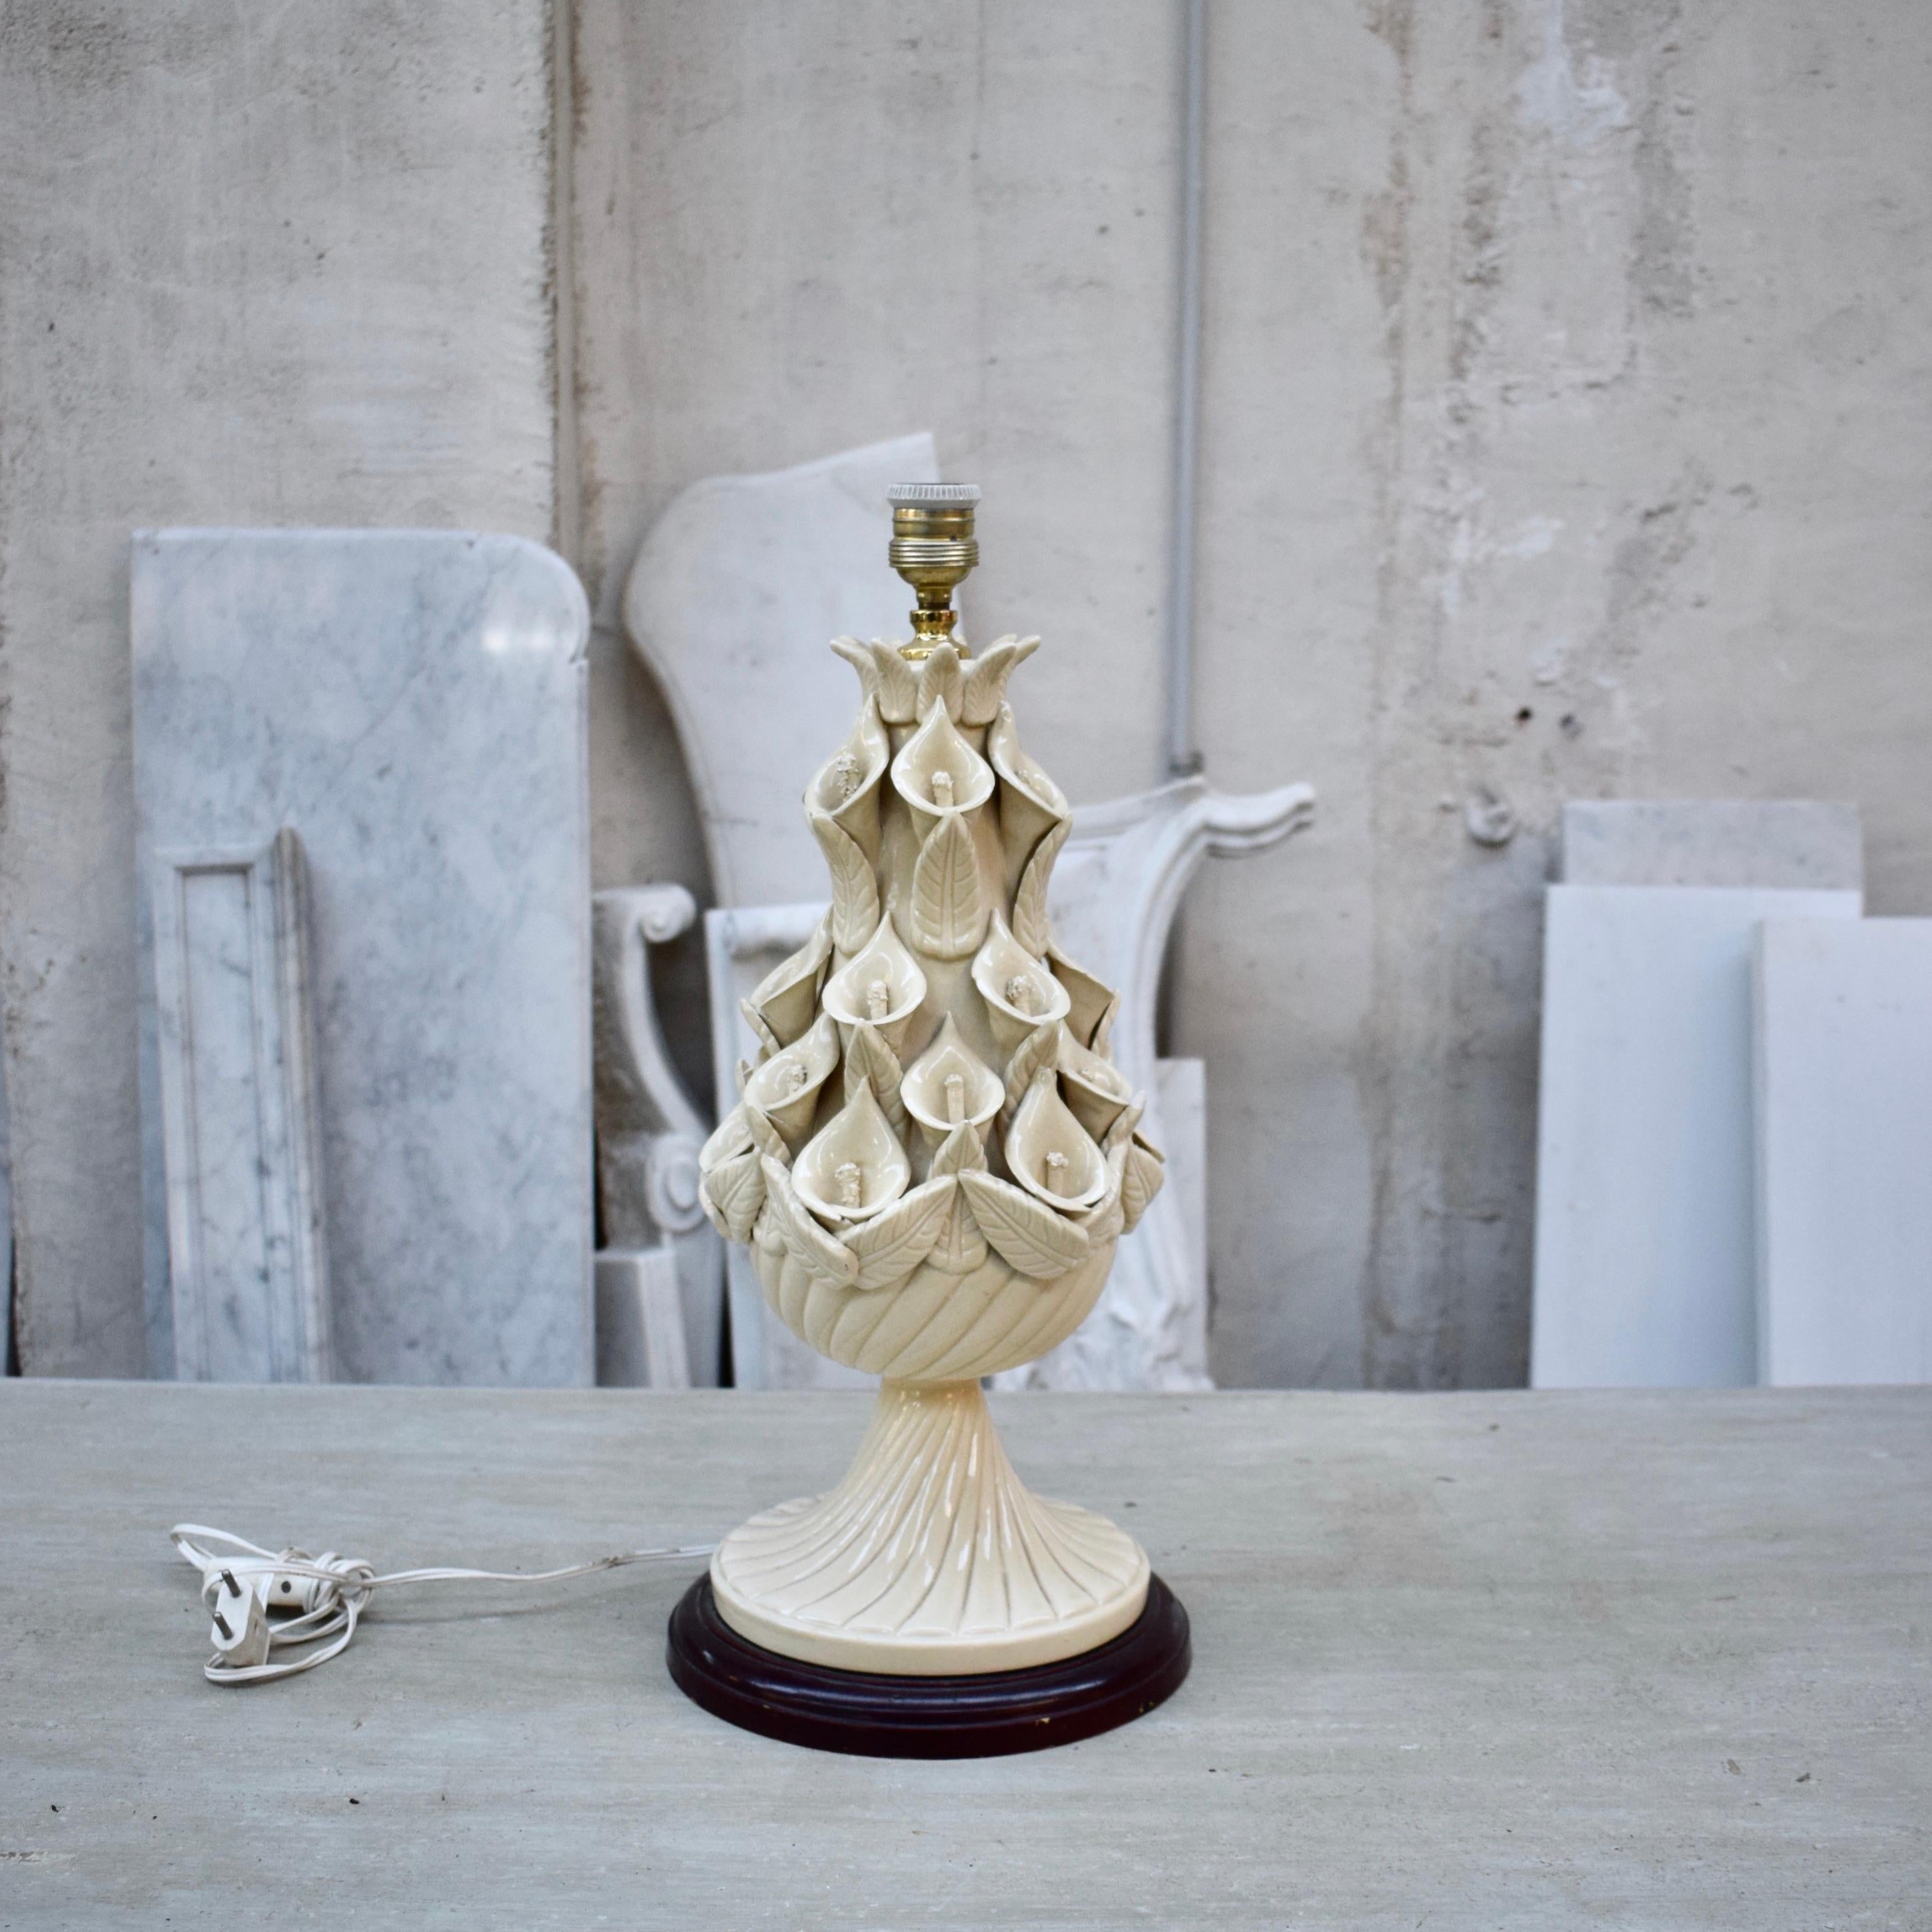 This vintage Manises ceramic table lamp by Ceramica Bondie was made in Spain near Valencia during the 1960s. It is glazed in a wonderful ivory/white ceramic color with handmade floral motifs adorning the sides of the lamp. It stands on a wooden